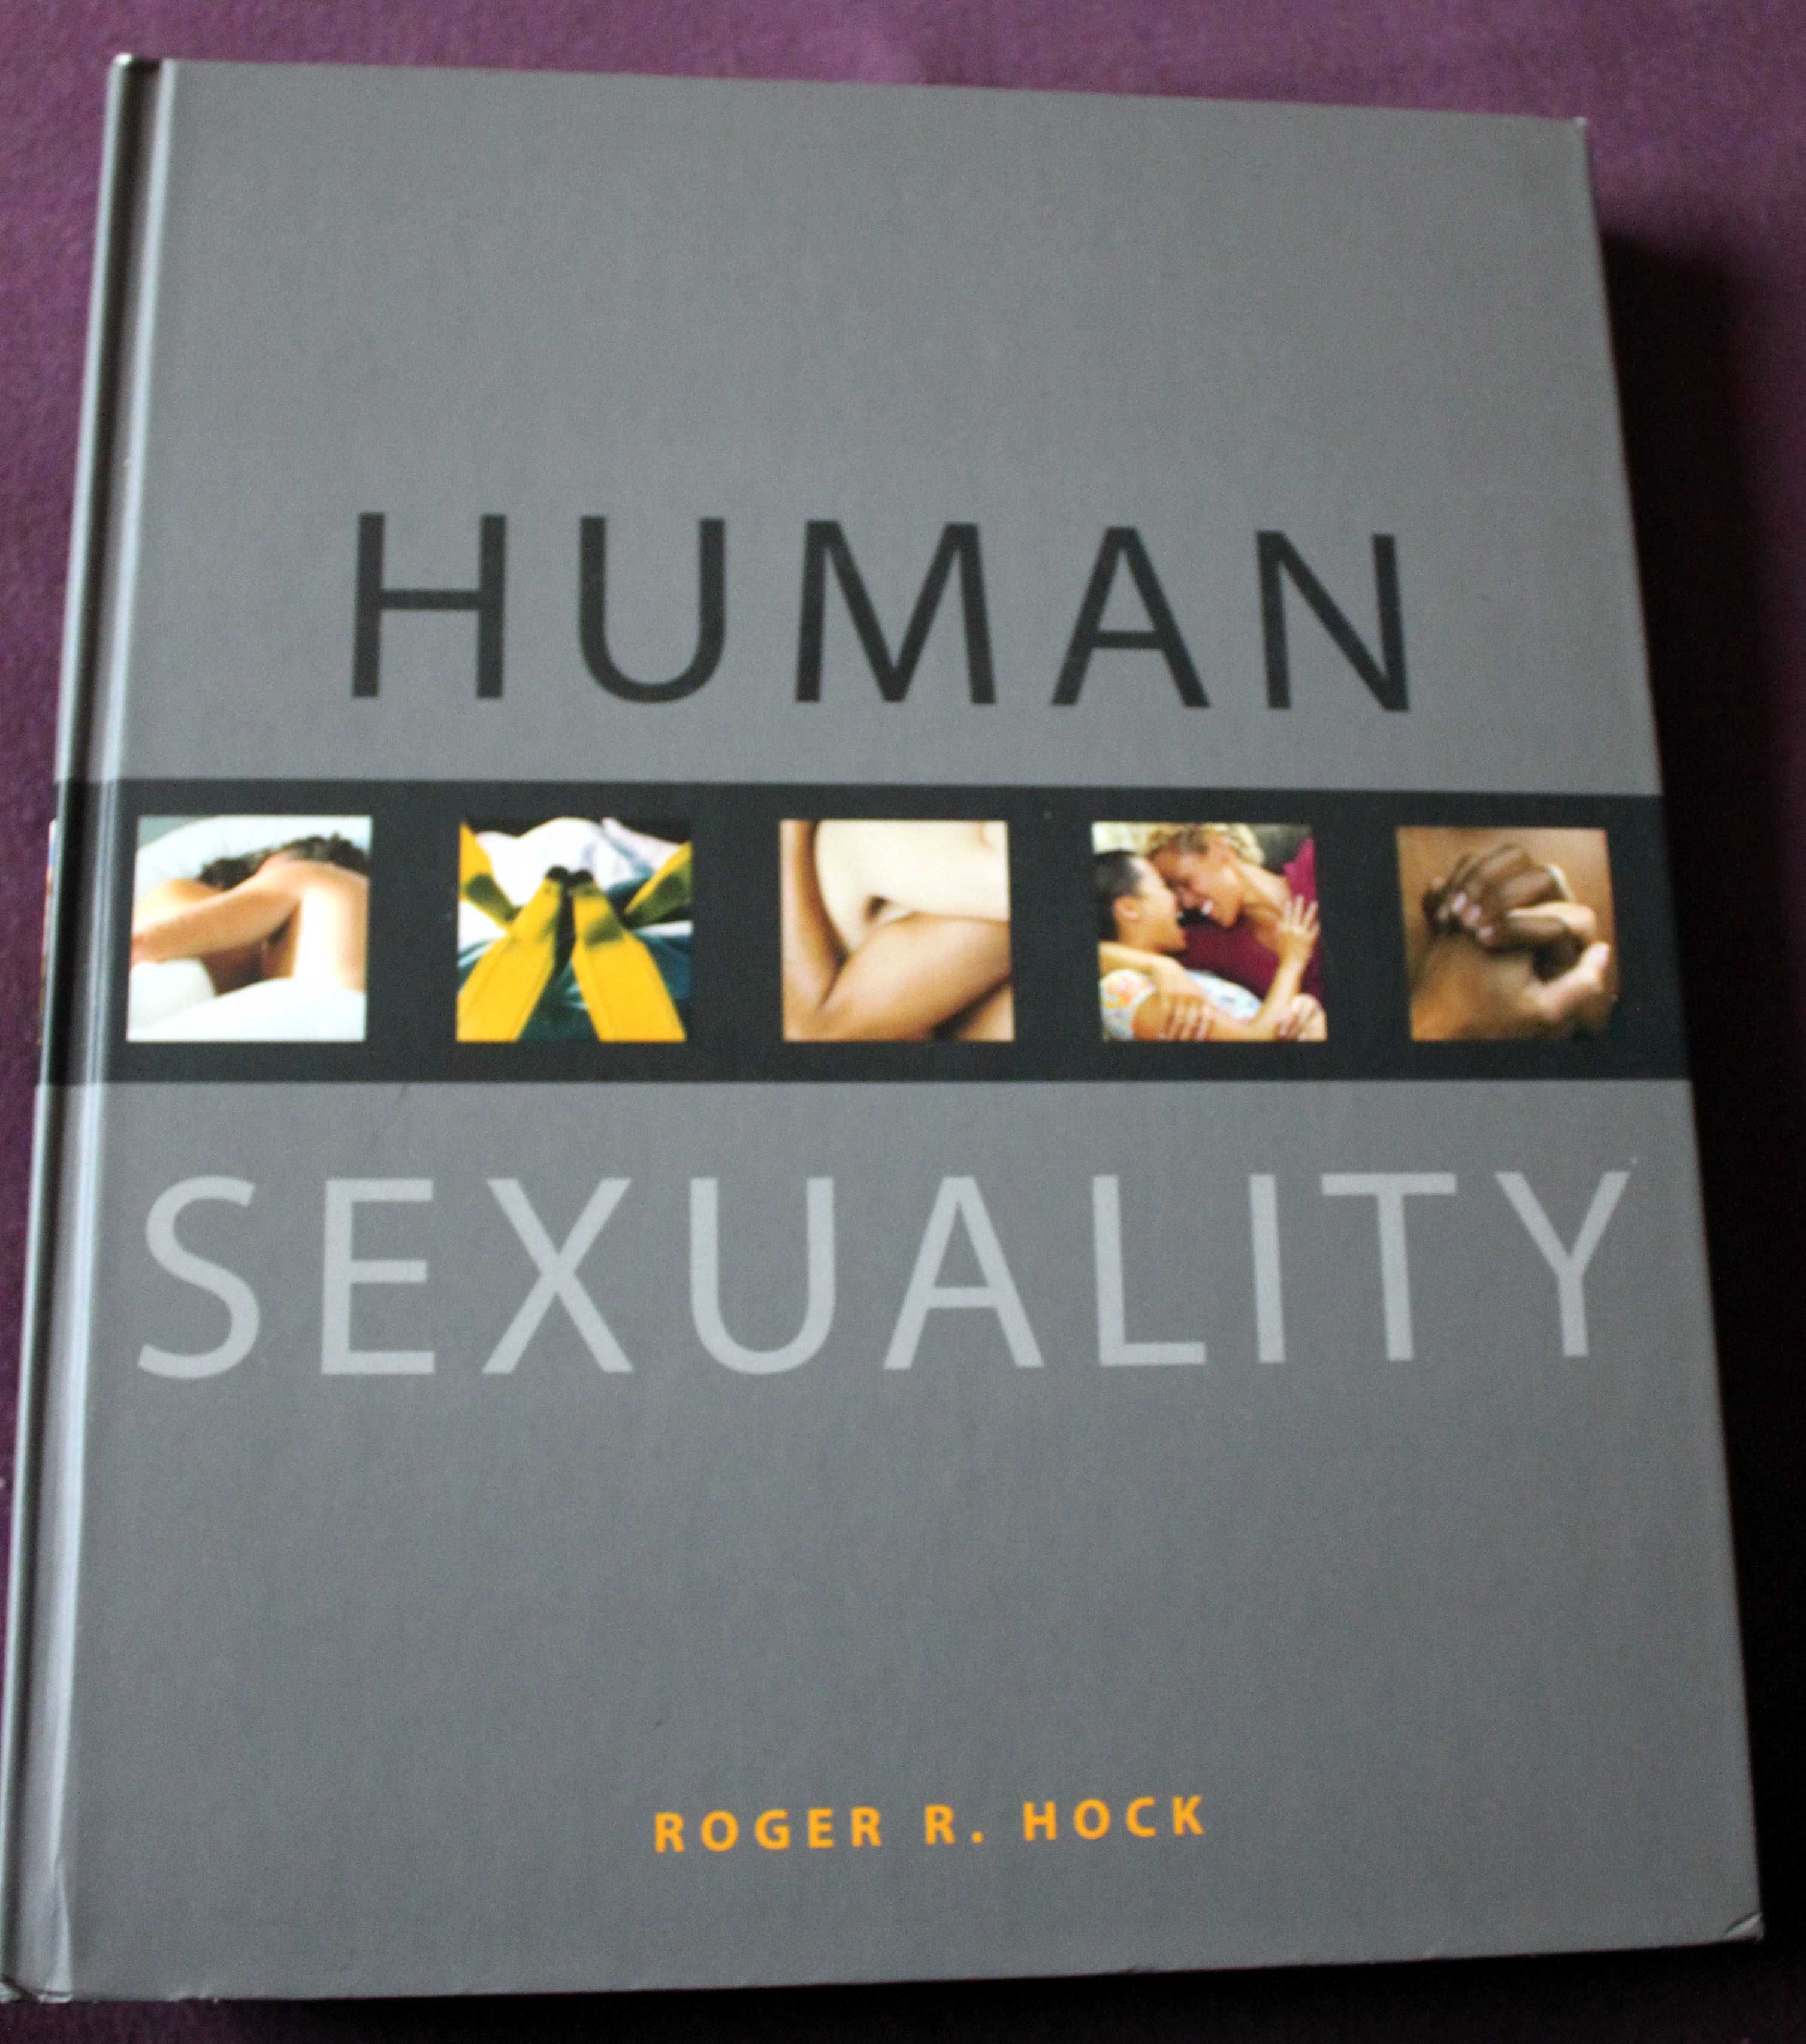 Human Sexuality - Roger R. Hock